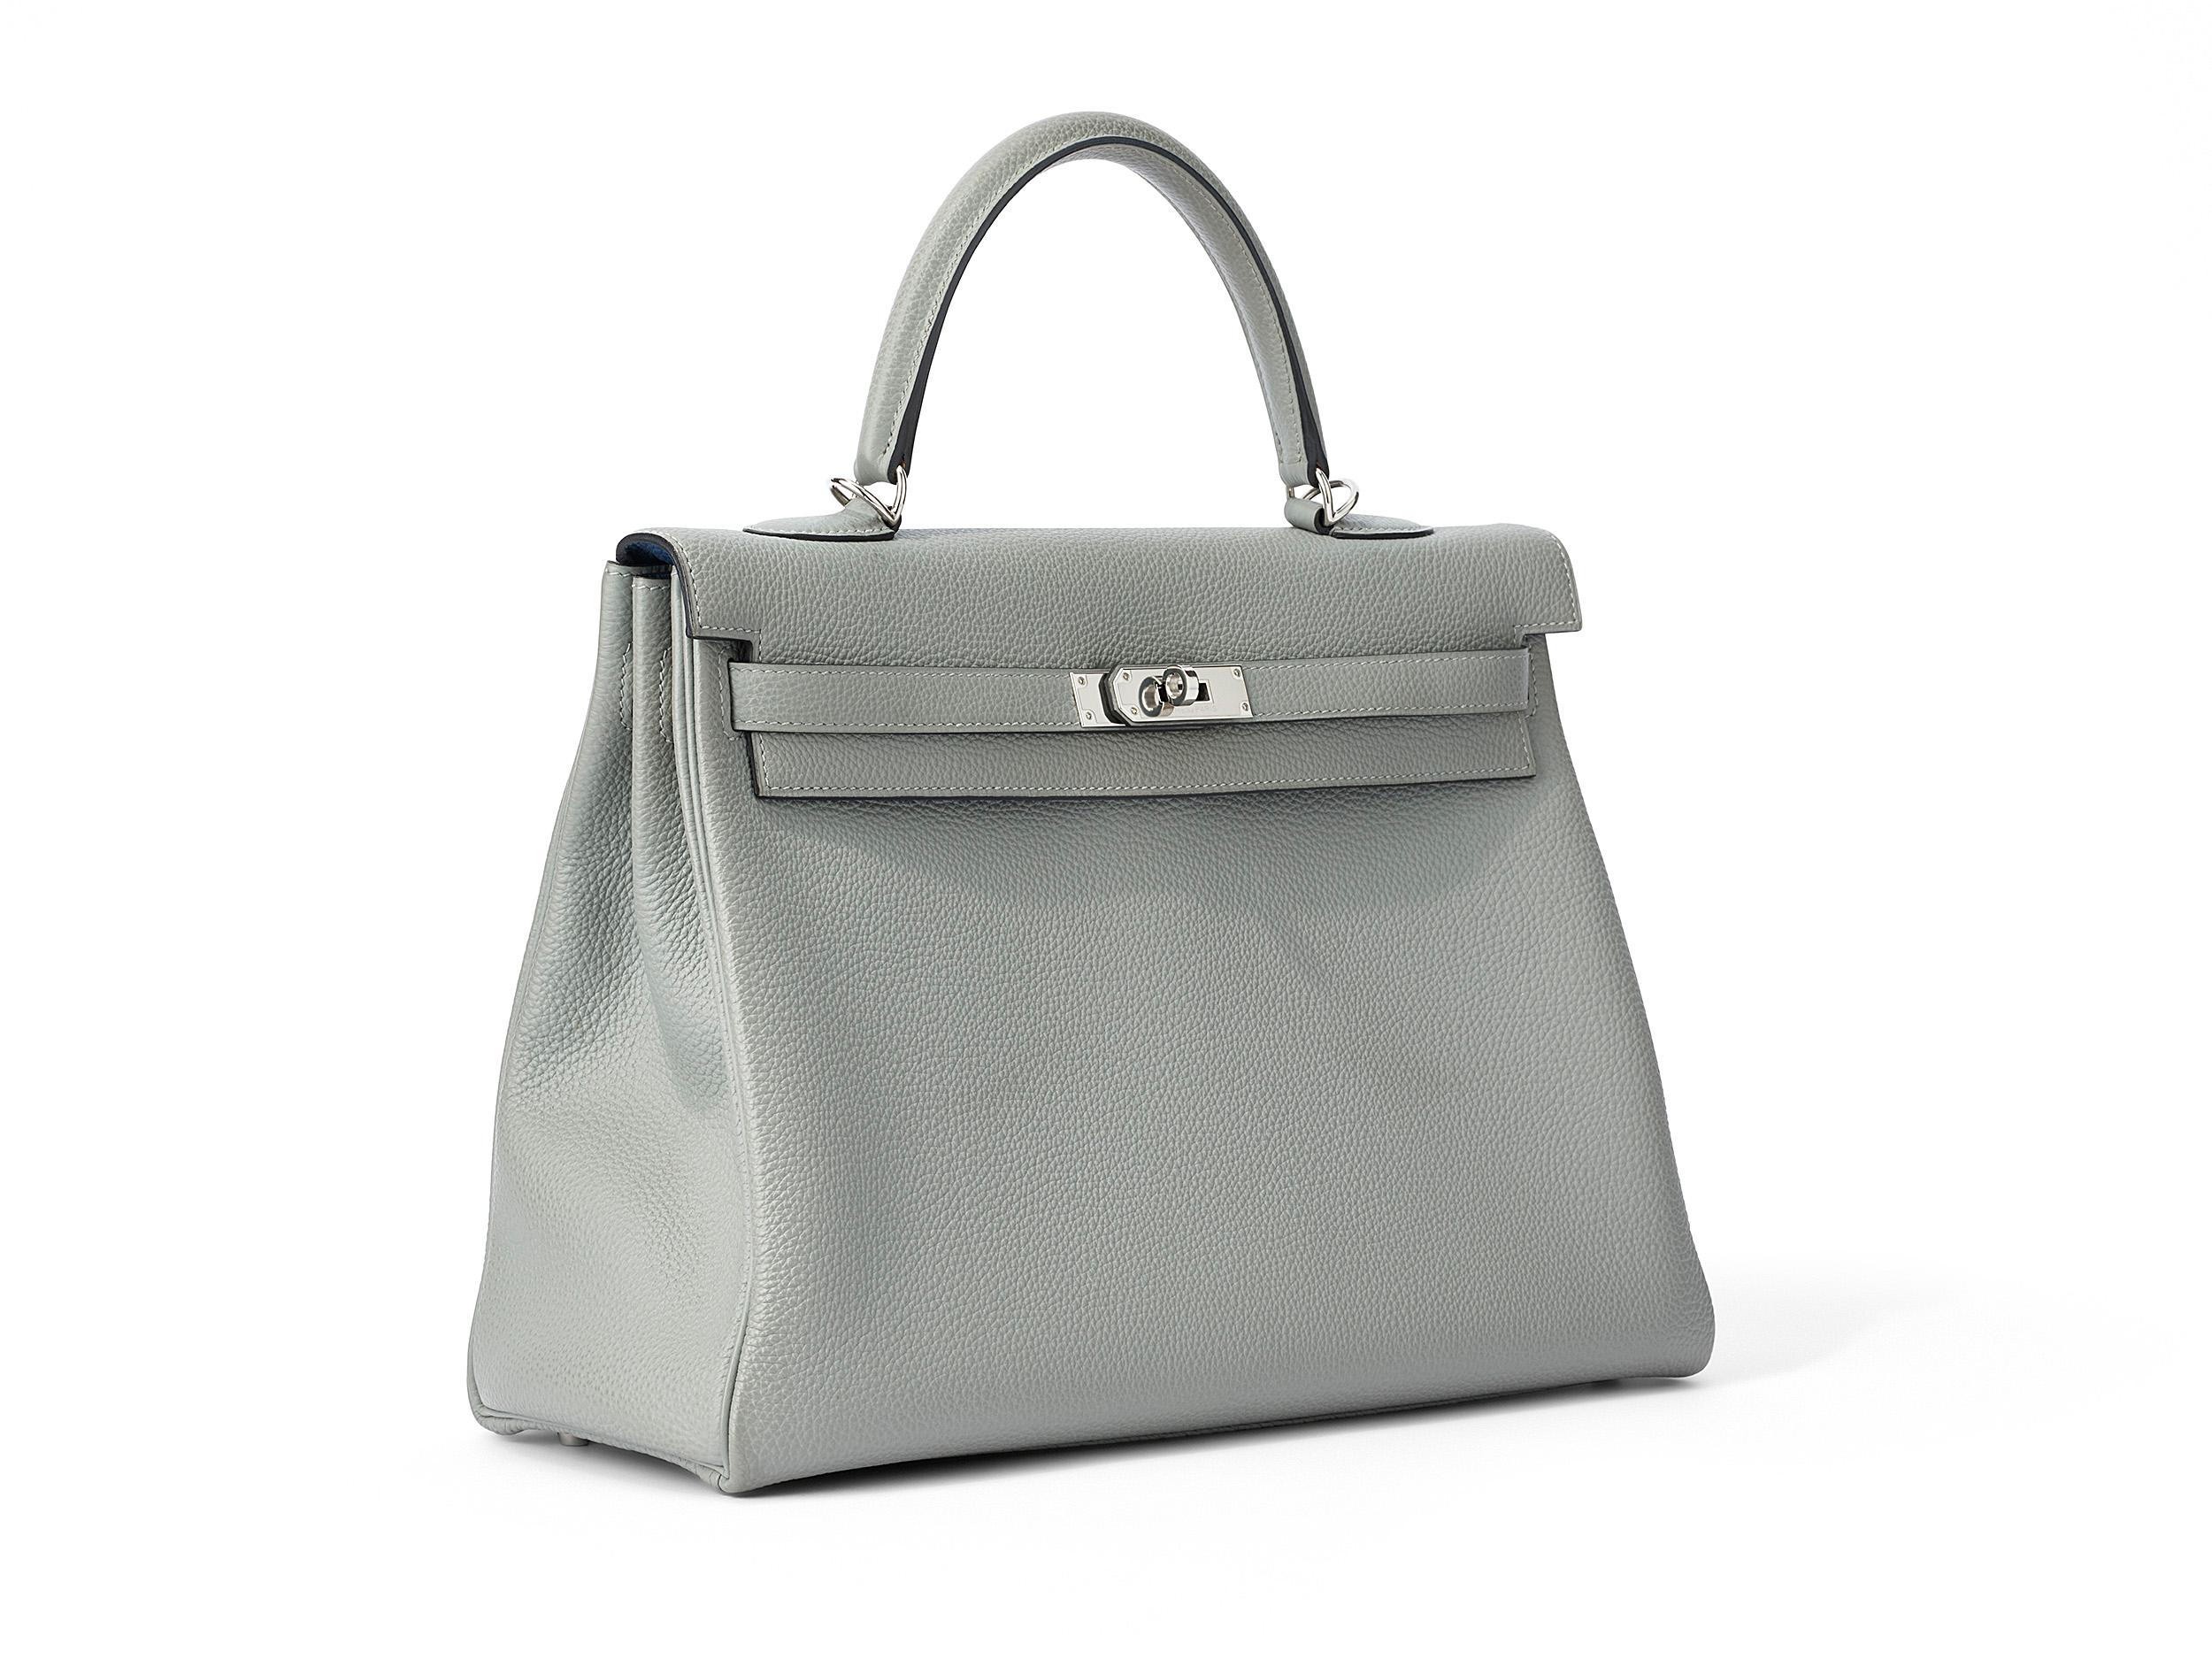 Hermès Kelly Verso 35 in gris/bleu and togo leather with palladium hardware. The bag has small marks on the front side as pictured and scratches on the feet. Comes as full set.  
Stamp A (2017) 

